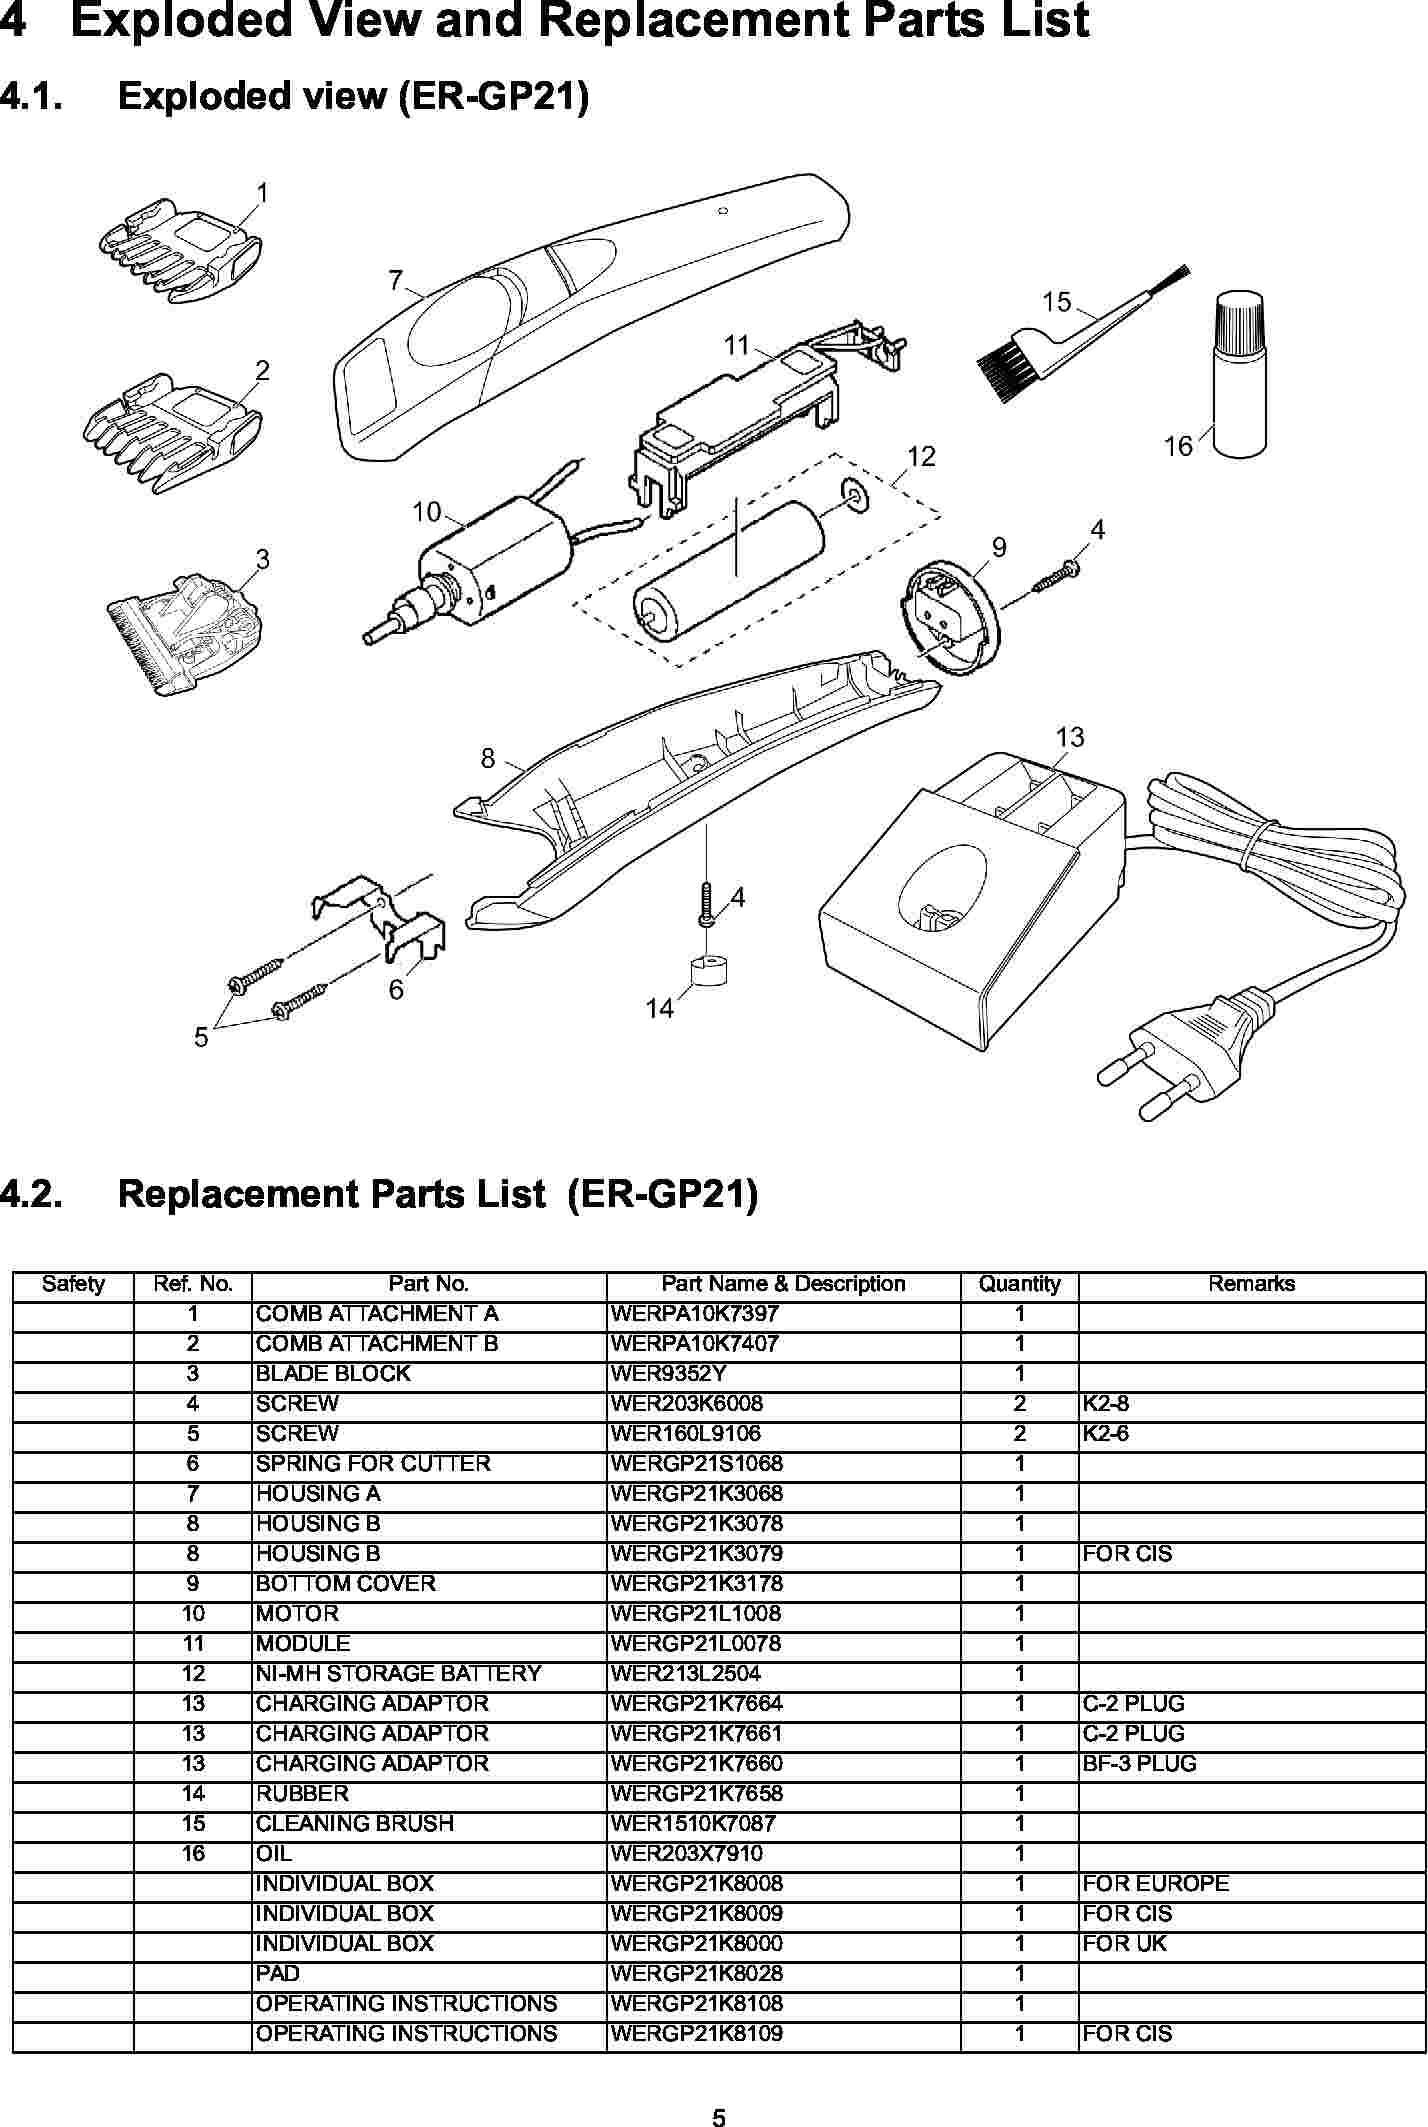 ER-GP21: Exploded View